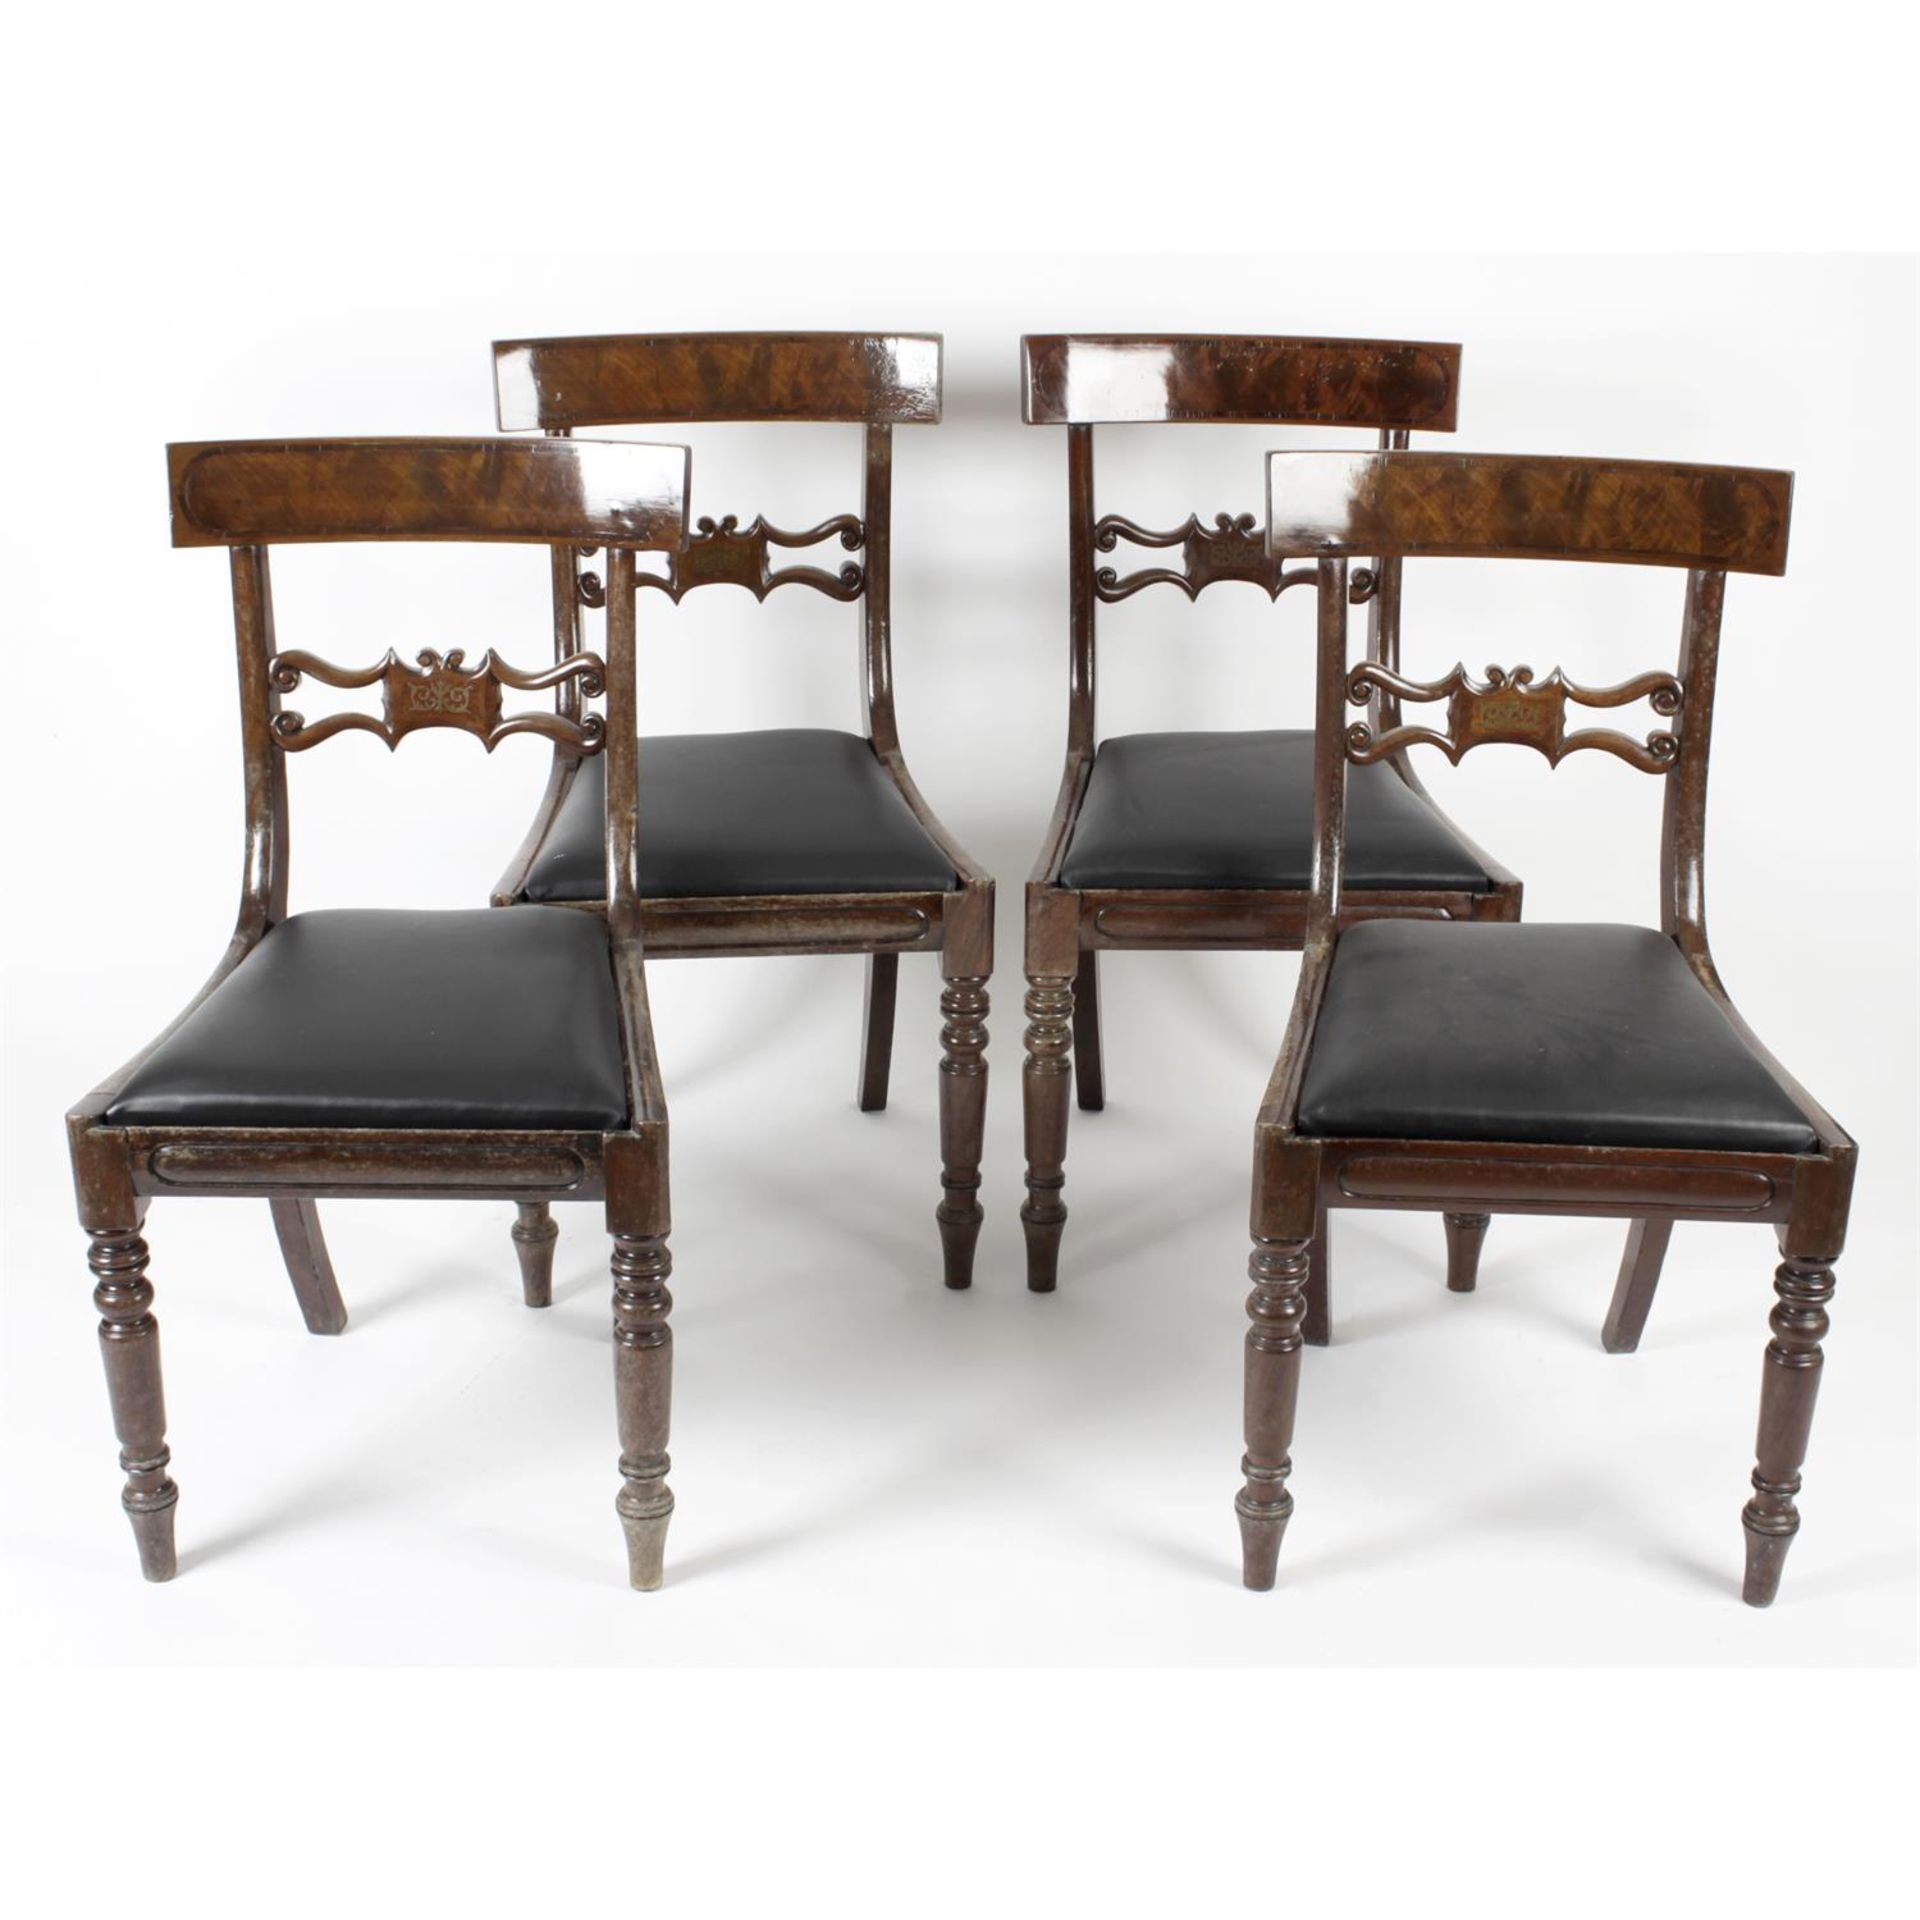 A set of four 19th century mahogany framed dining room chairs.